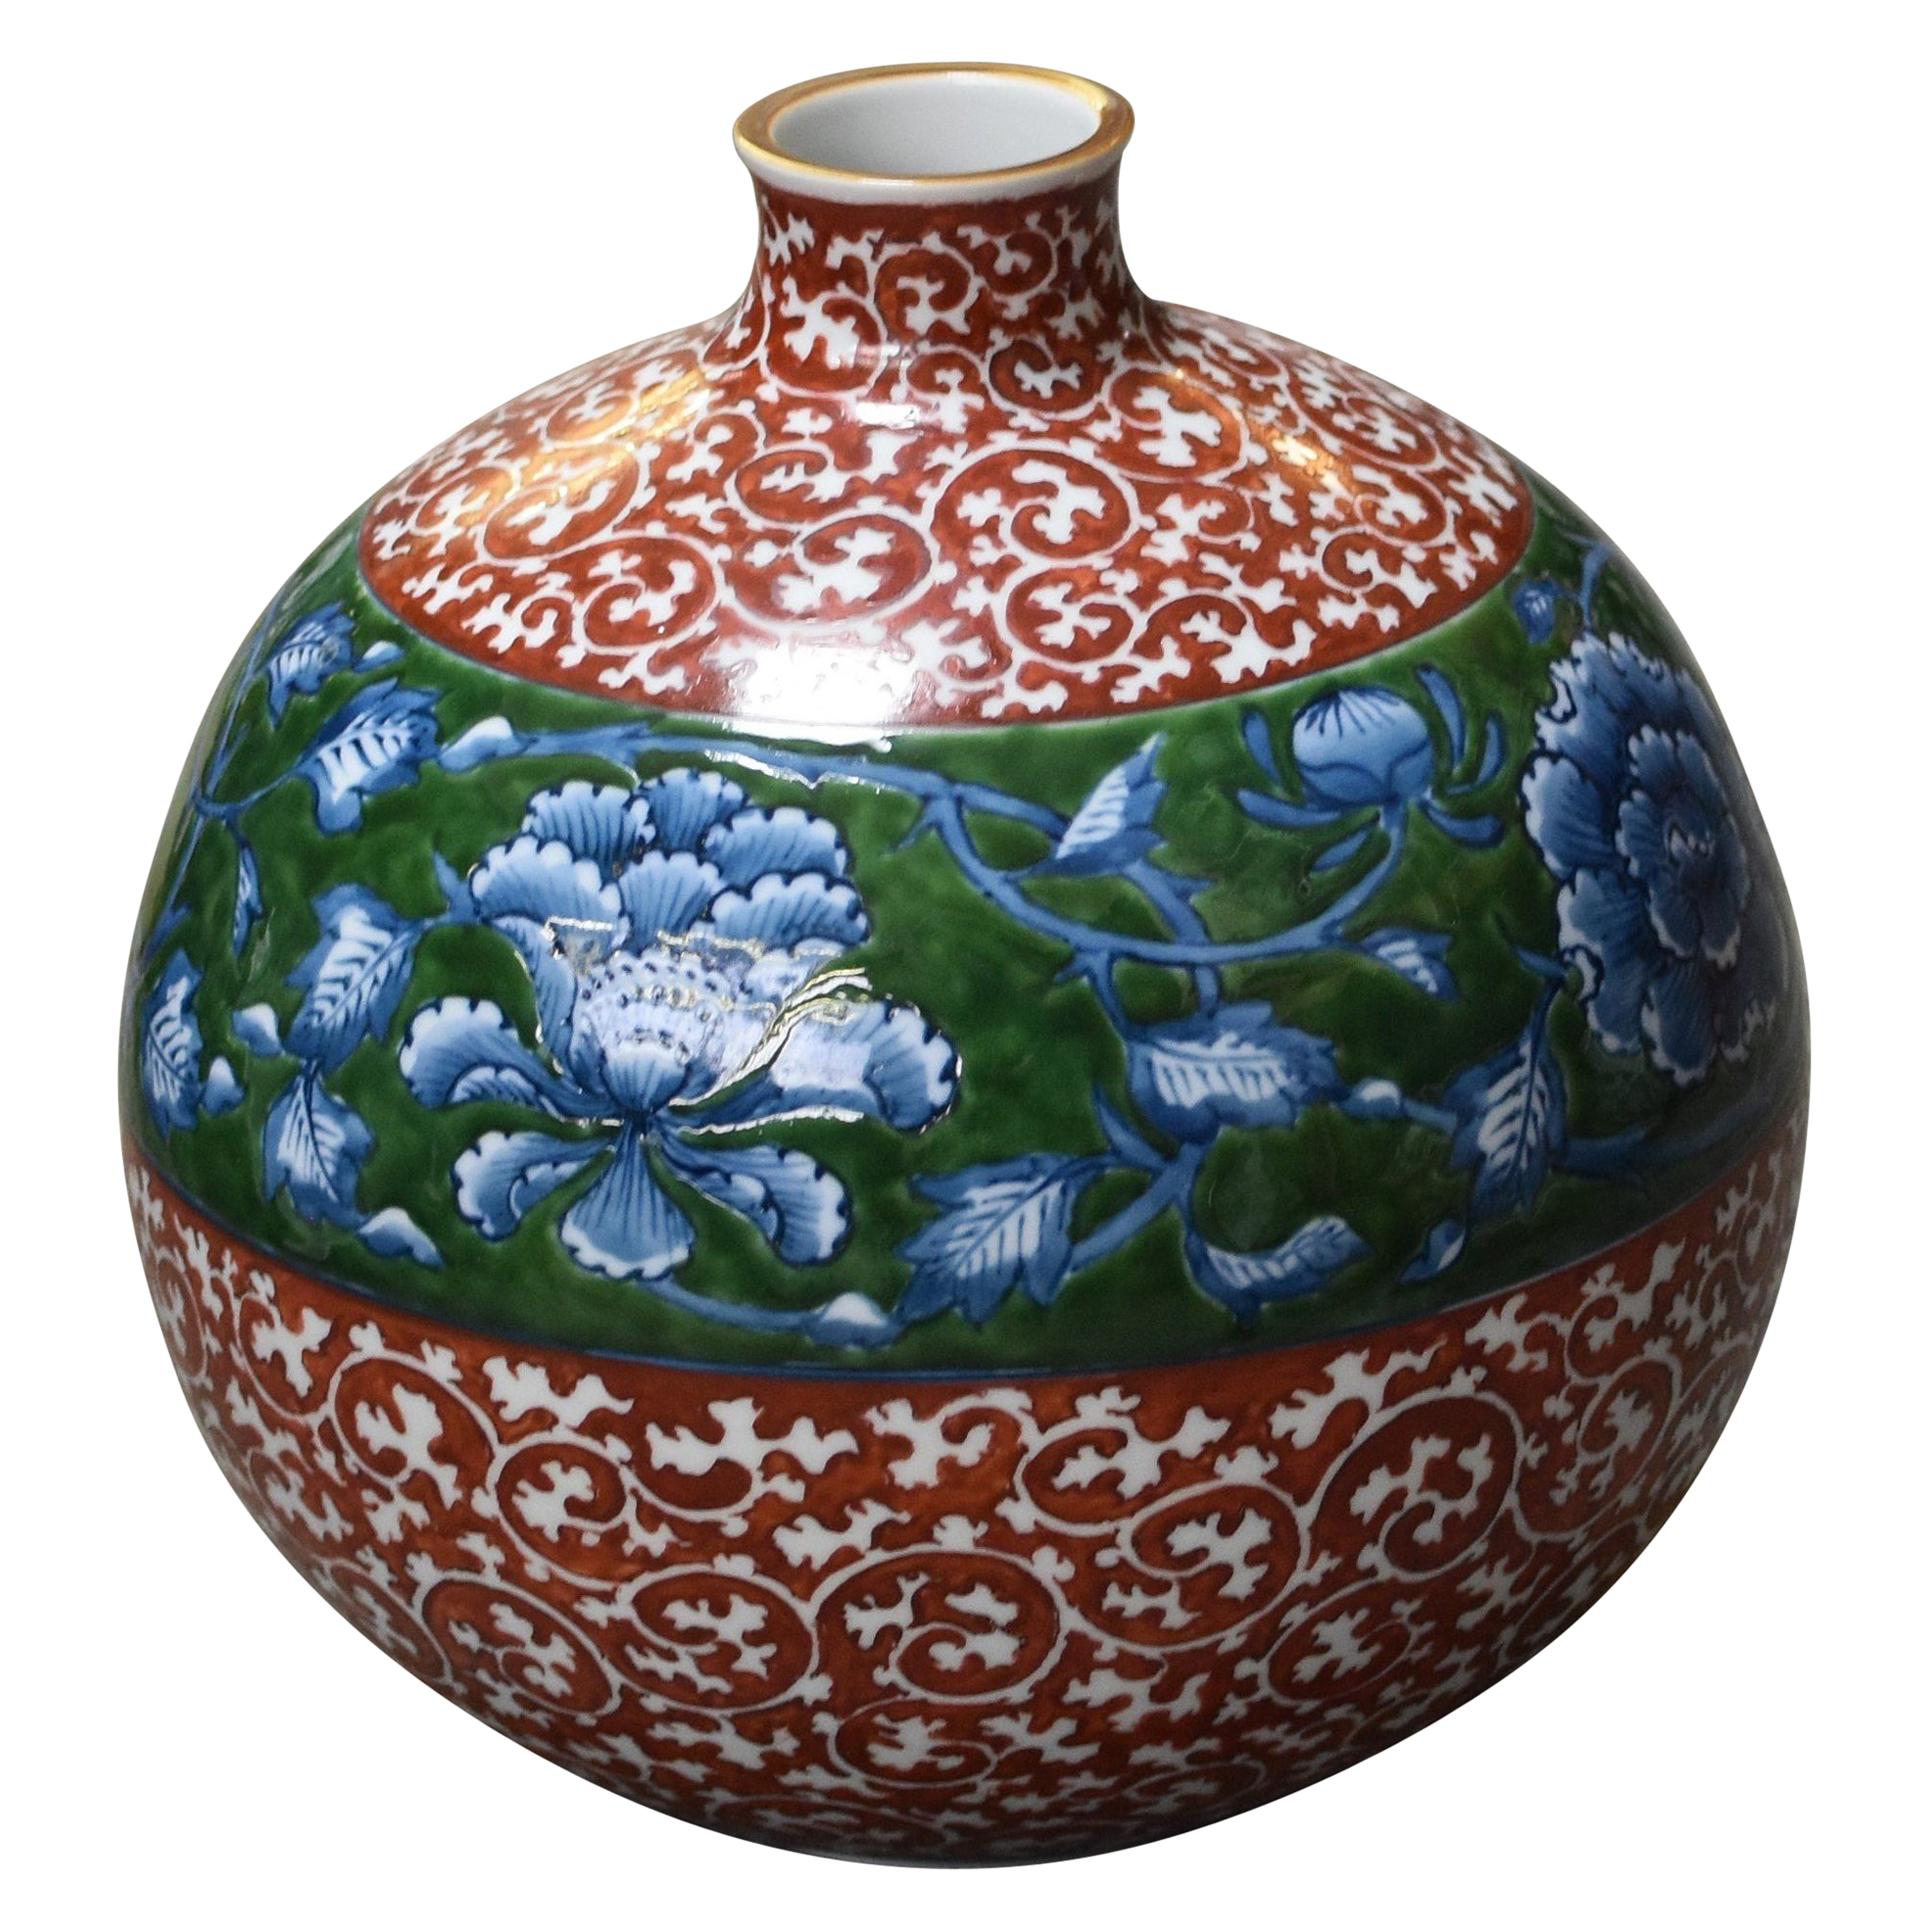 Contemporary Red Blue Green Porcelain Vase by Japanese Master Artist